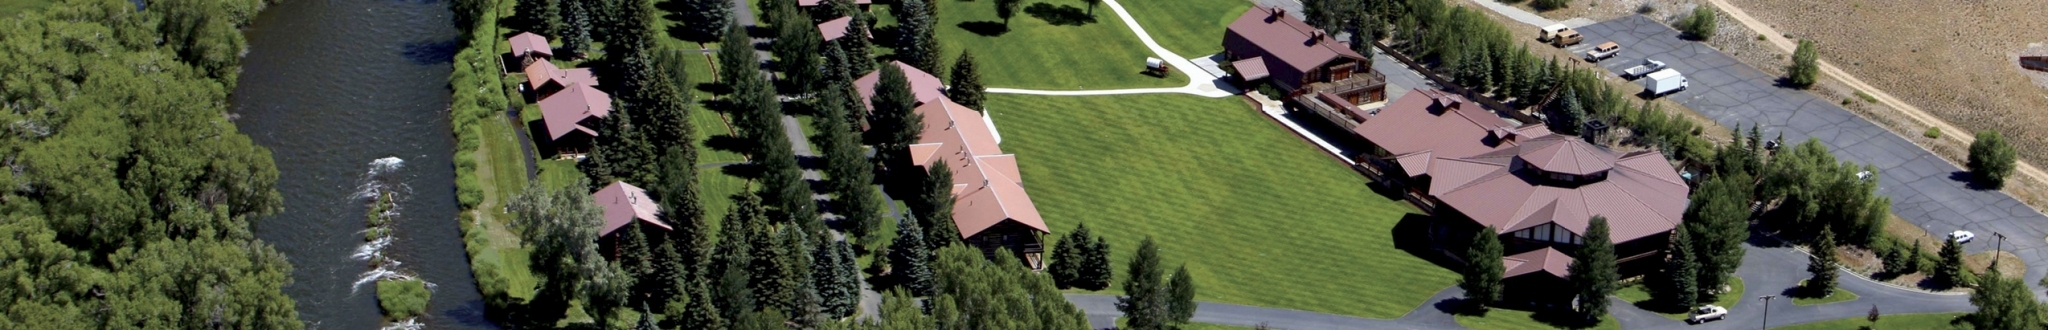 Camp Gunnison—The Way Household Ranch aerial view